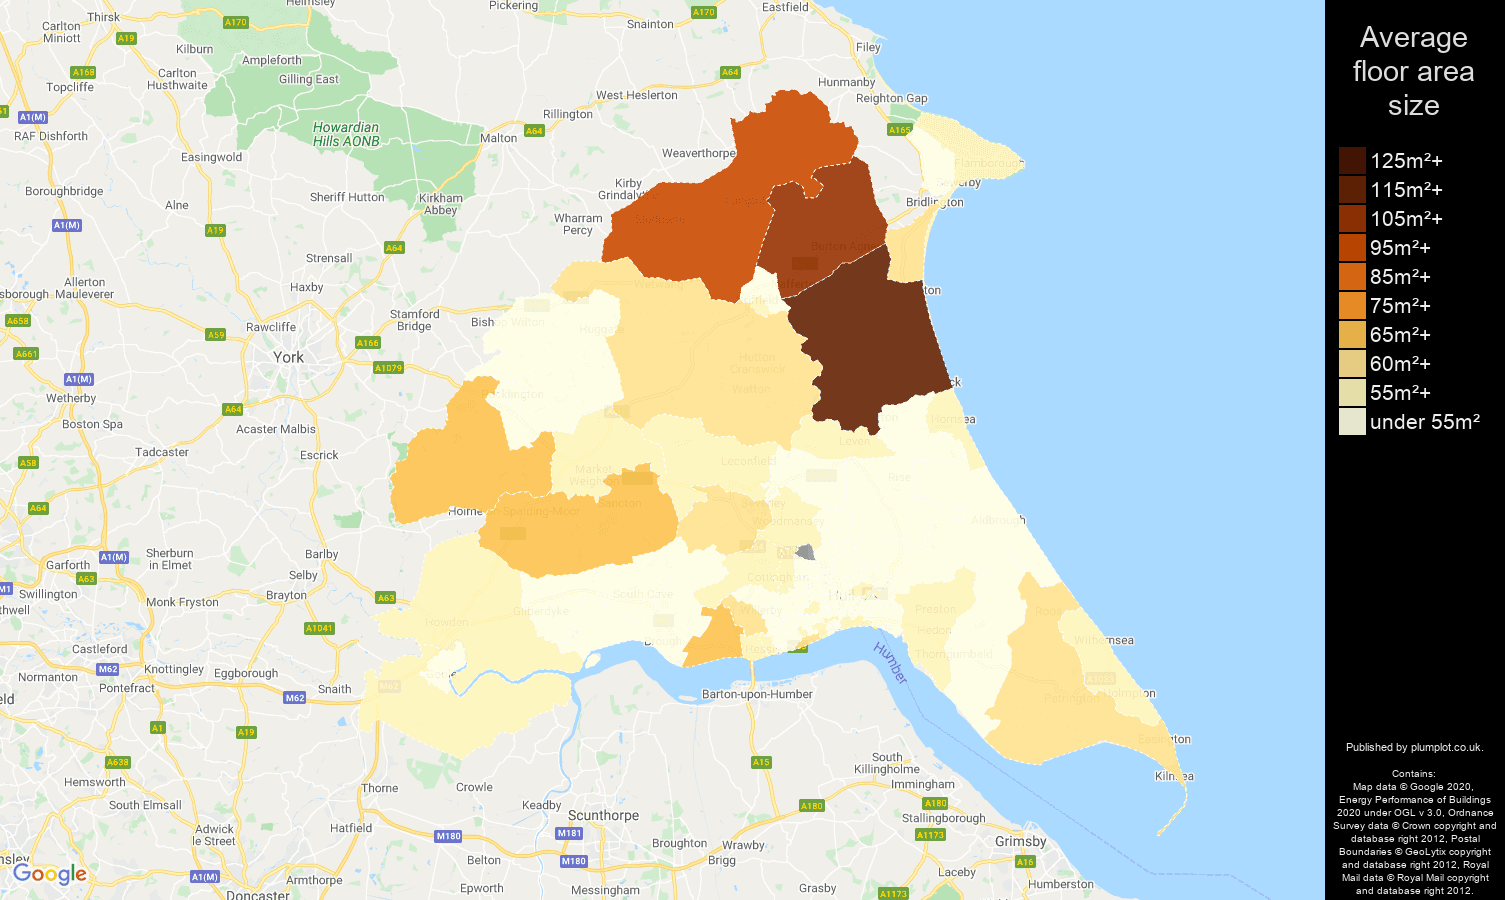 East Riding of Yorkshire map of average floor area size of flats